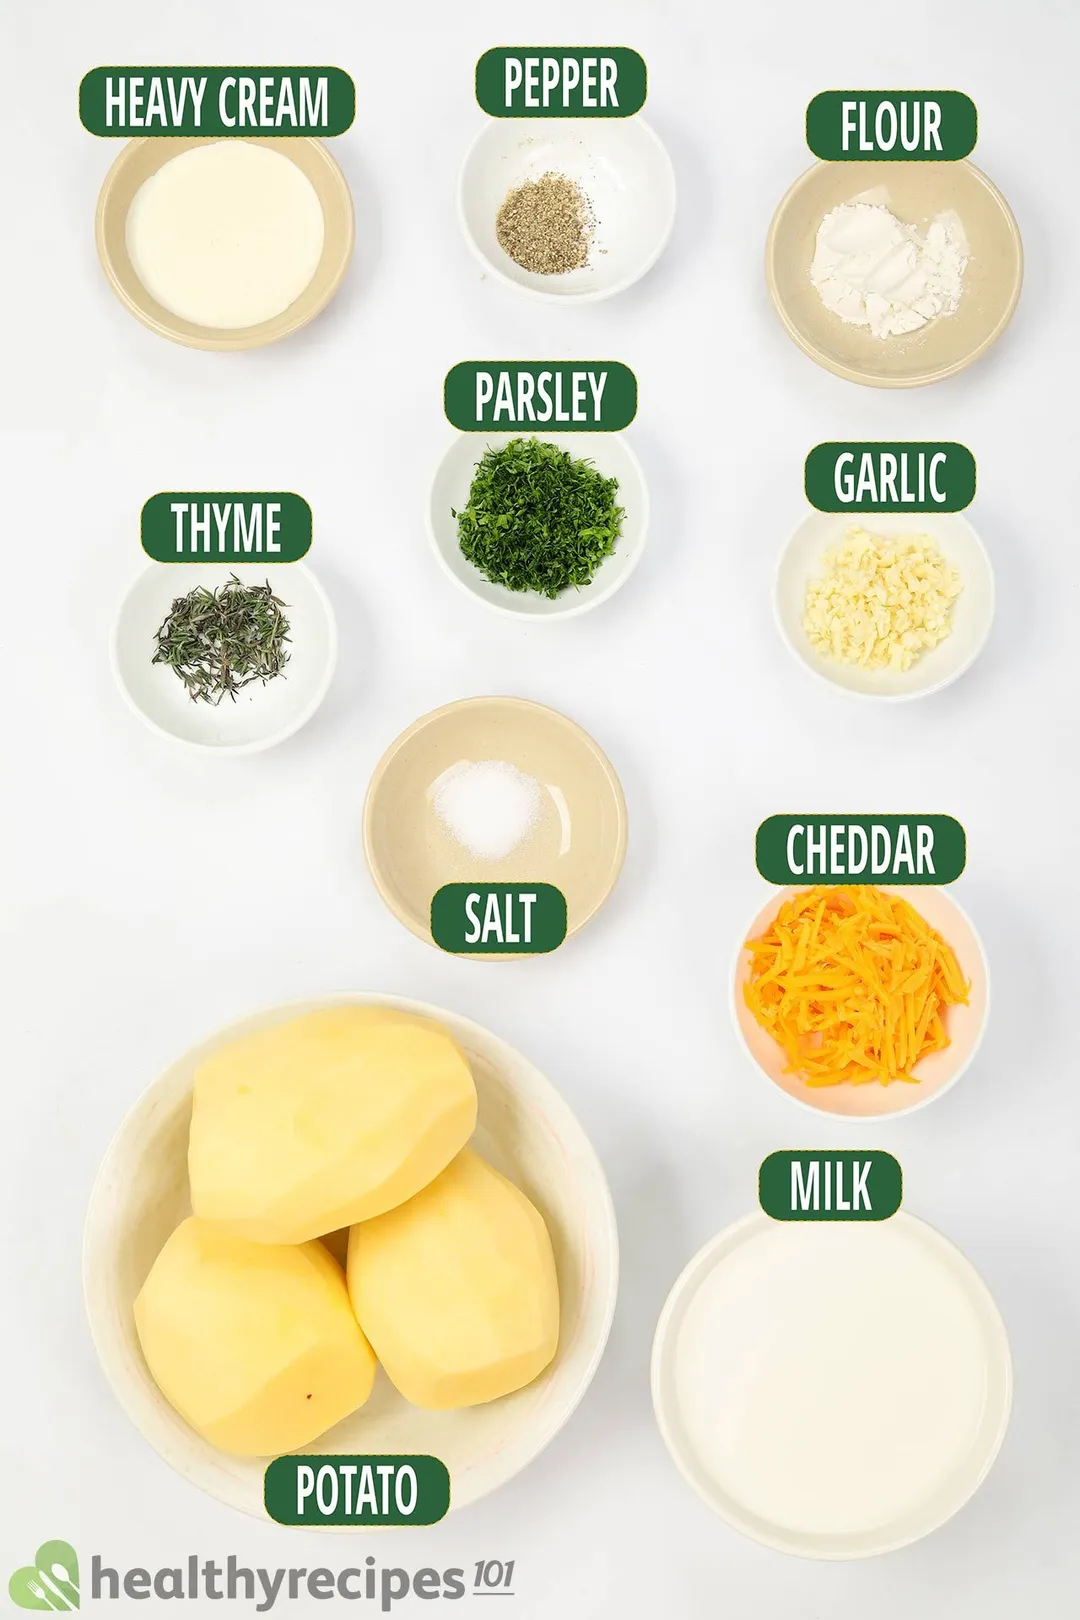 Ingredients for potato gratin, including peeled potatoes, shredded cheddar cheese, milk, flour, chopped parsley, and others.